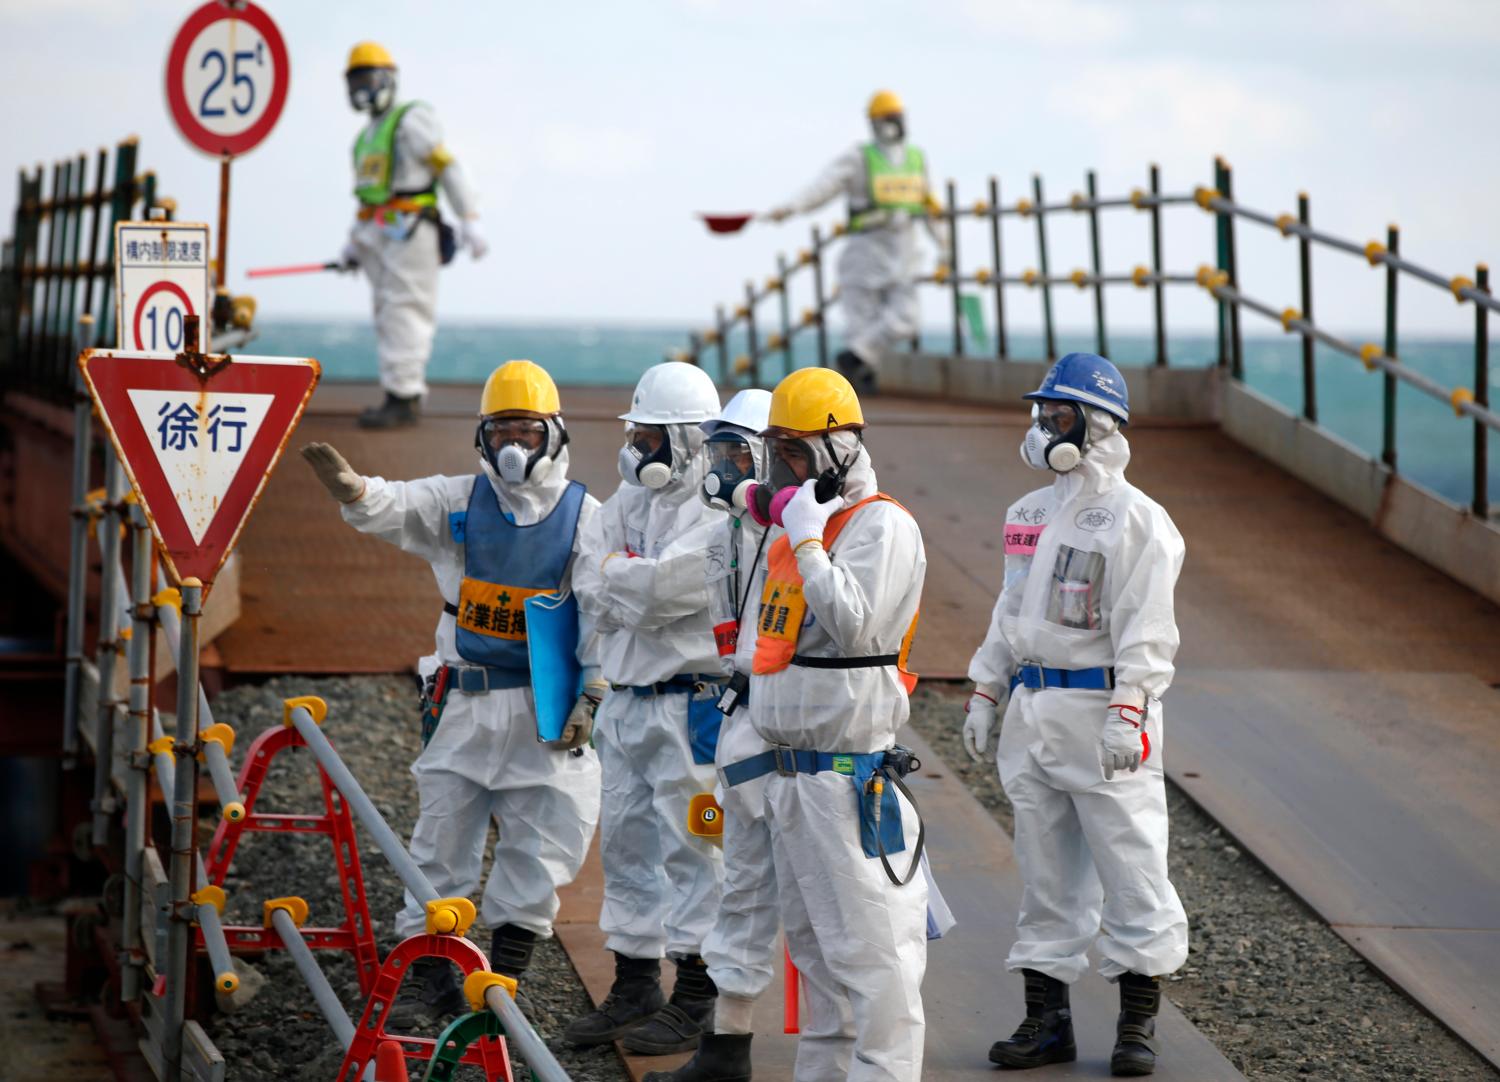 Workers, wearing protective suits and masks, are seen near the No. 3 and No.4 reactor buildings at Tokyo Electric Power Co's (TEPCO) tsunami-crippled Fukushima Daiichi nuclear power plant in Okuma town, Fukushima prefecture, Japan February 10, 2016. REUTERS/Toru Hanai - RTX26AMM